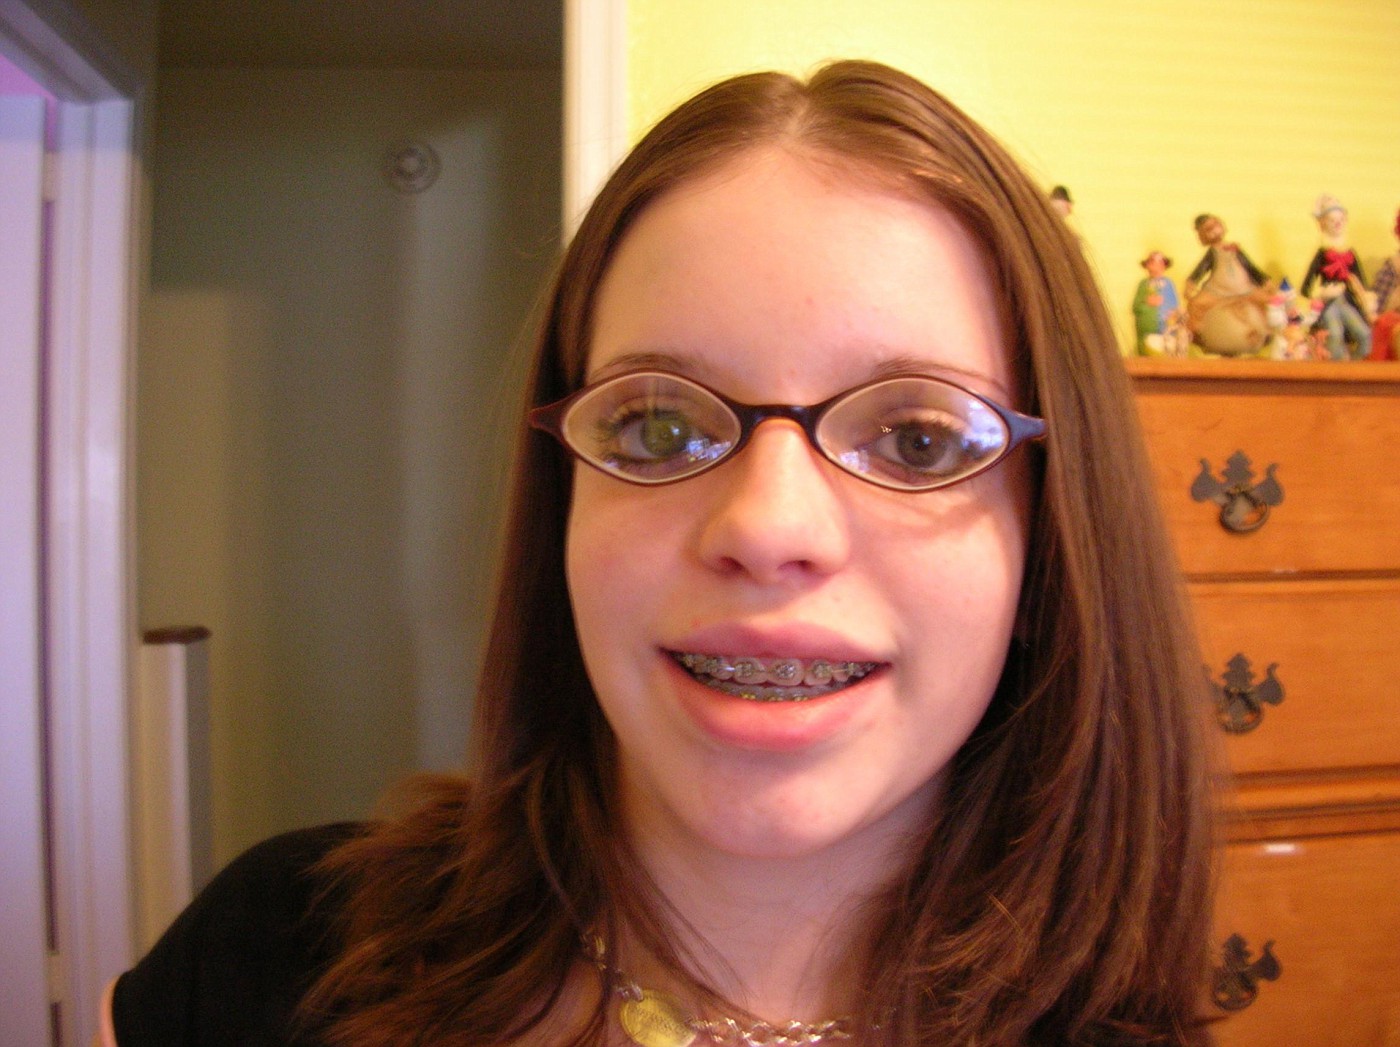 Ugly woman with glasses sucks dicks pic